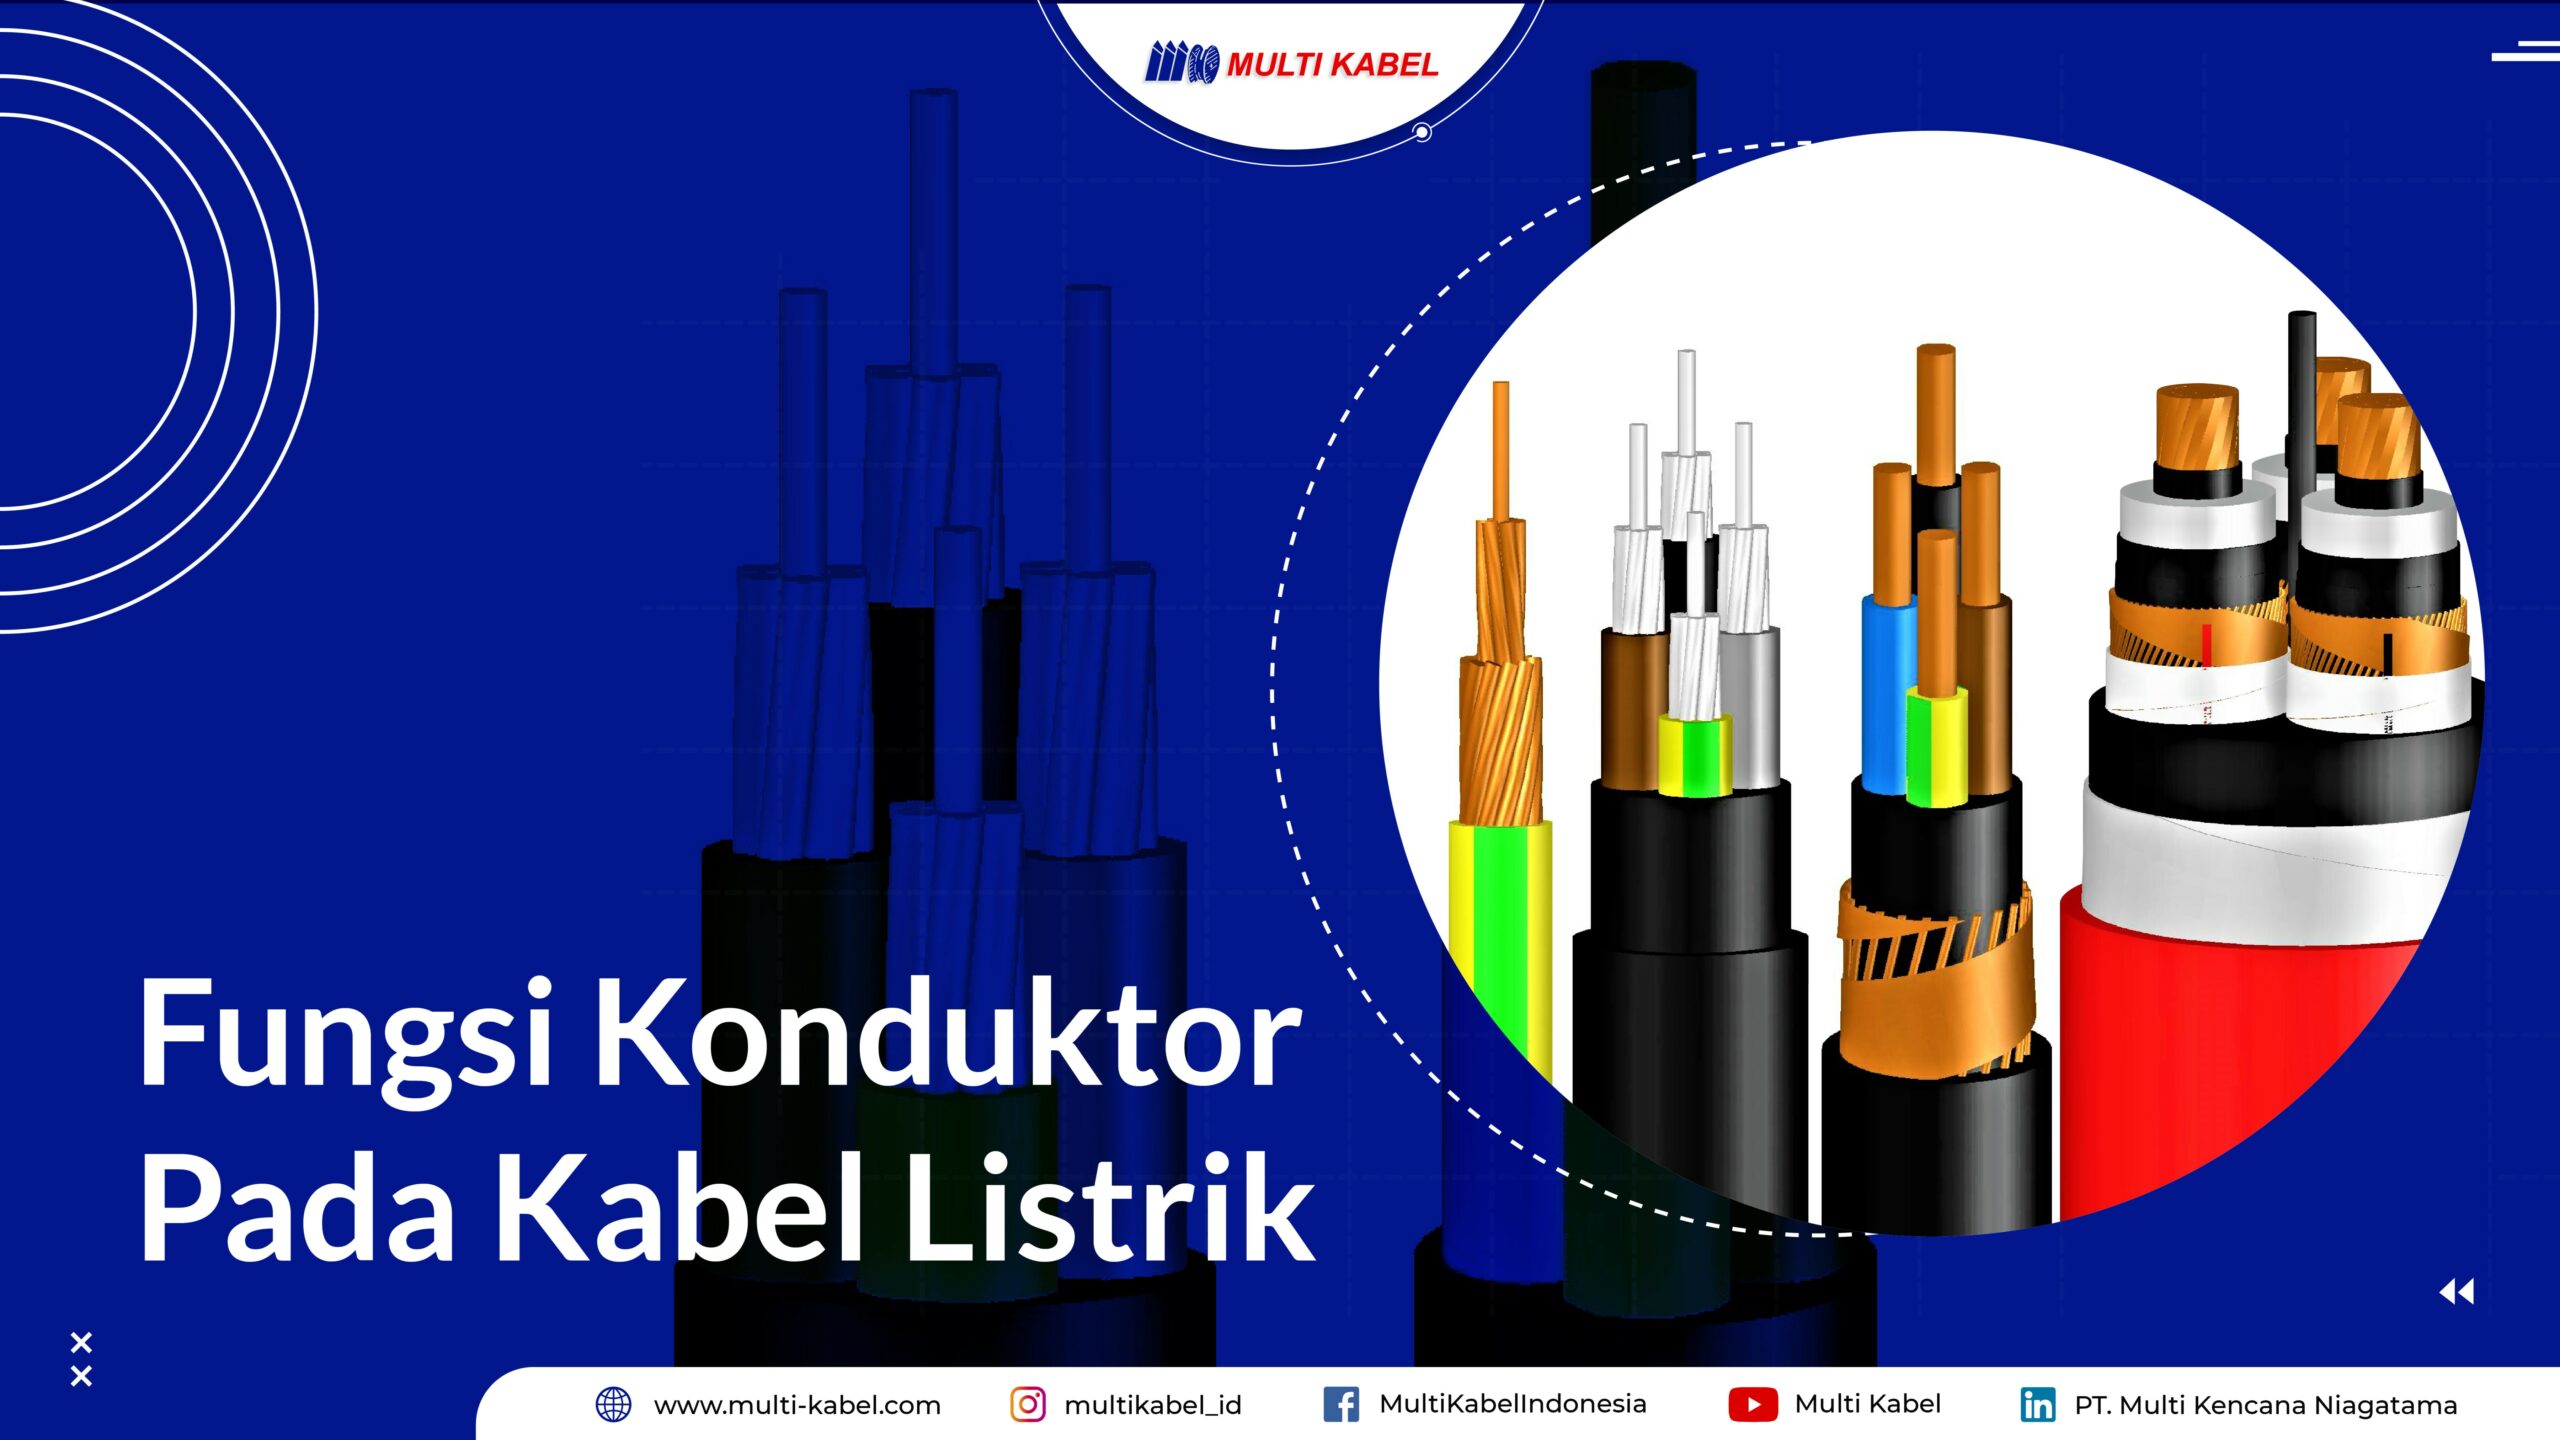 Multi Kabel  Biggest Power Cable Manufacturer in Indonesia